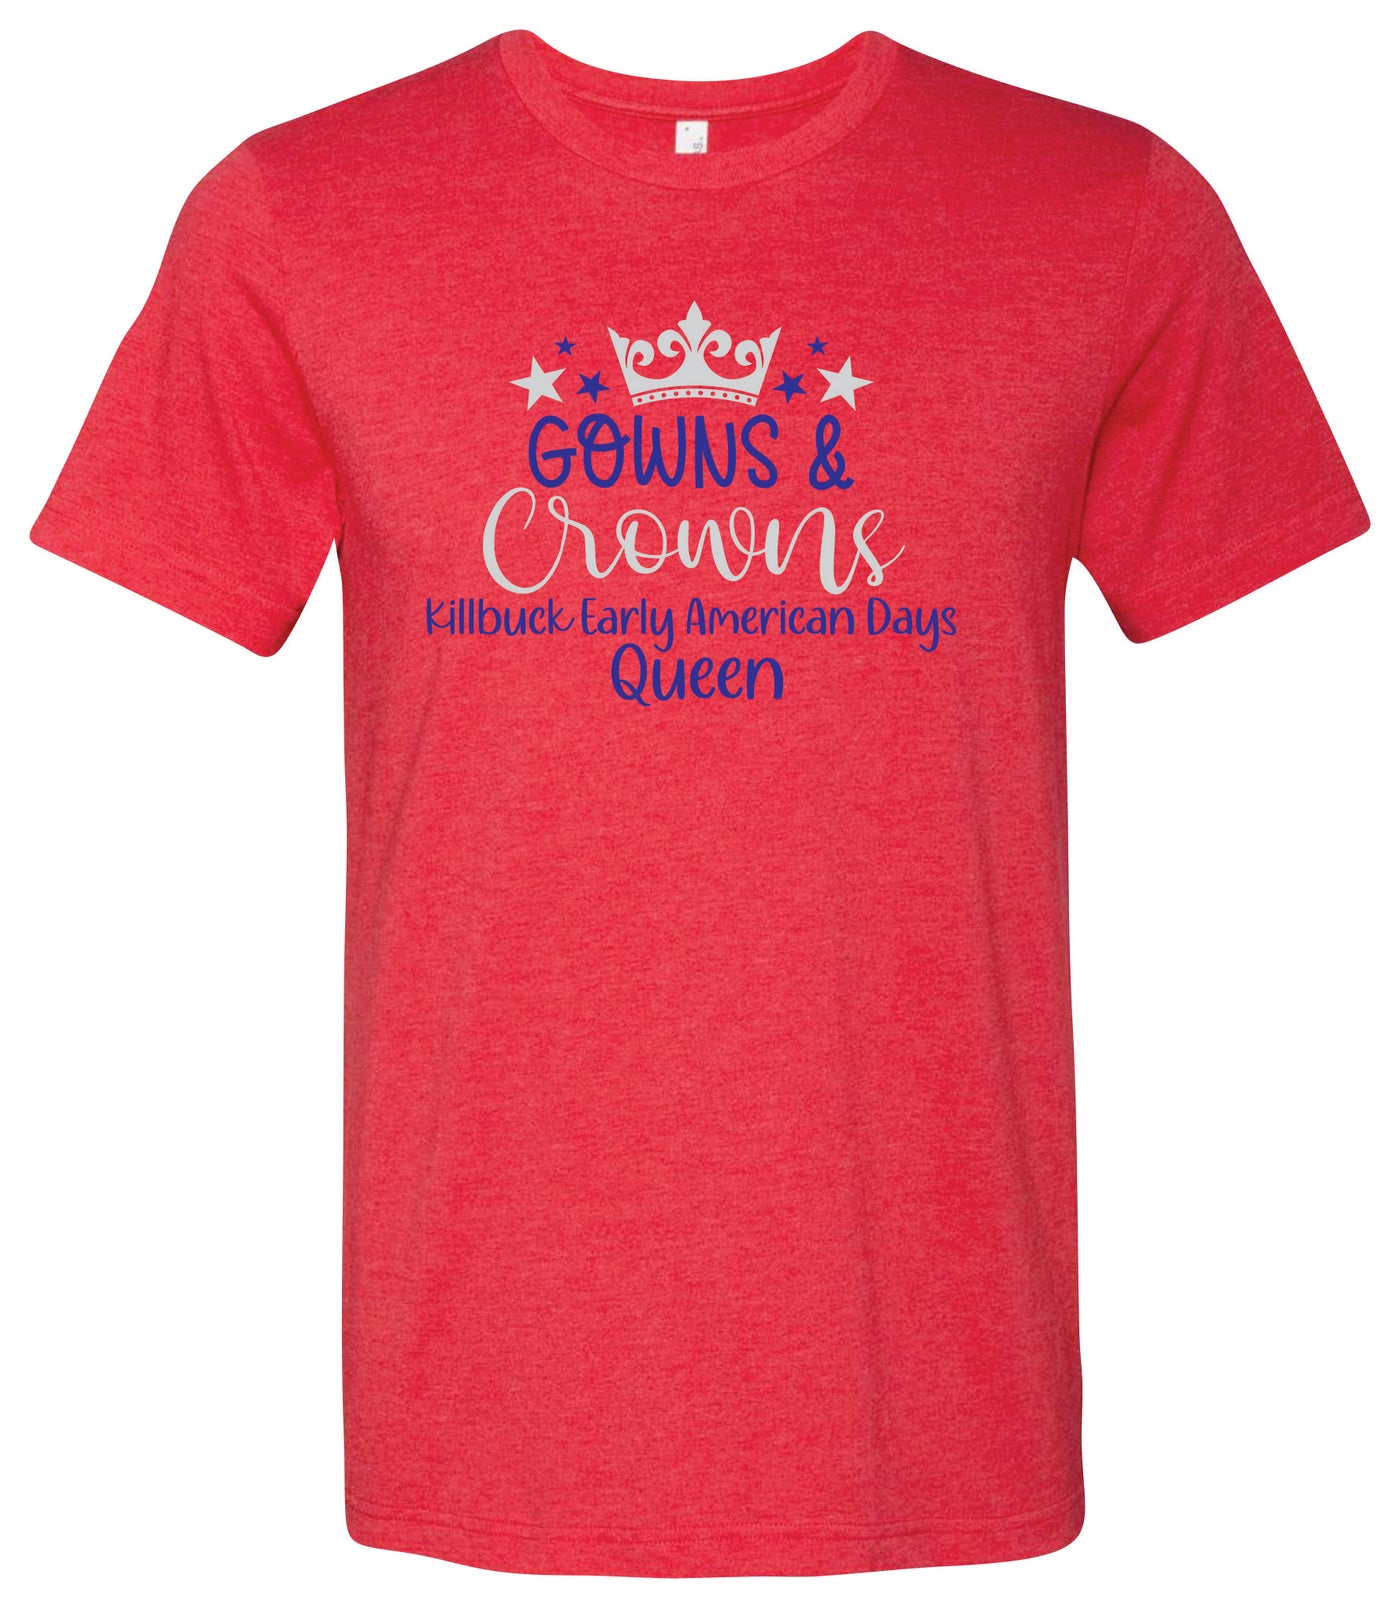 Gowns and Crowns Short Sleeve Graphic T-shirt